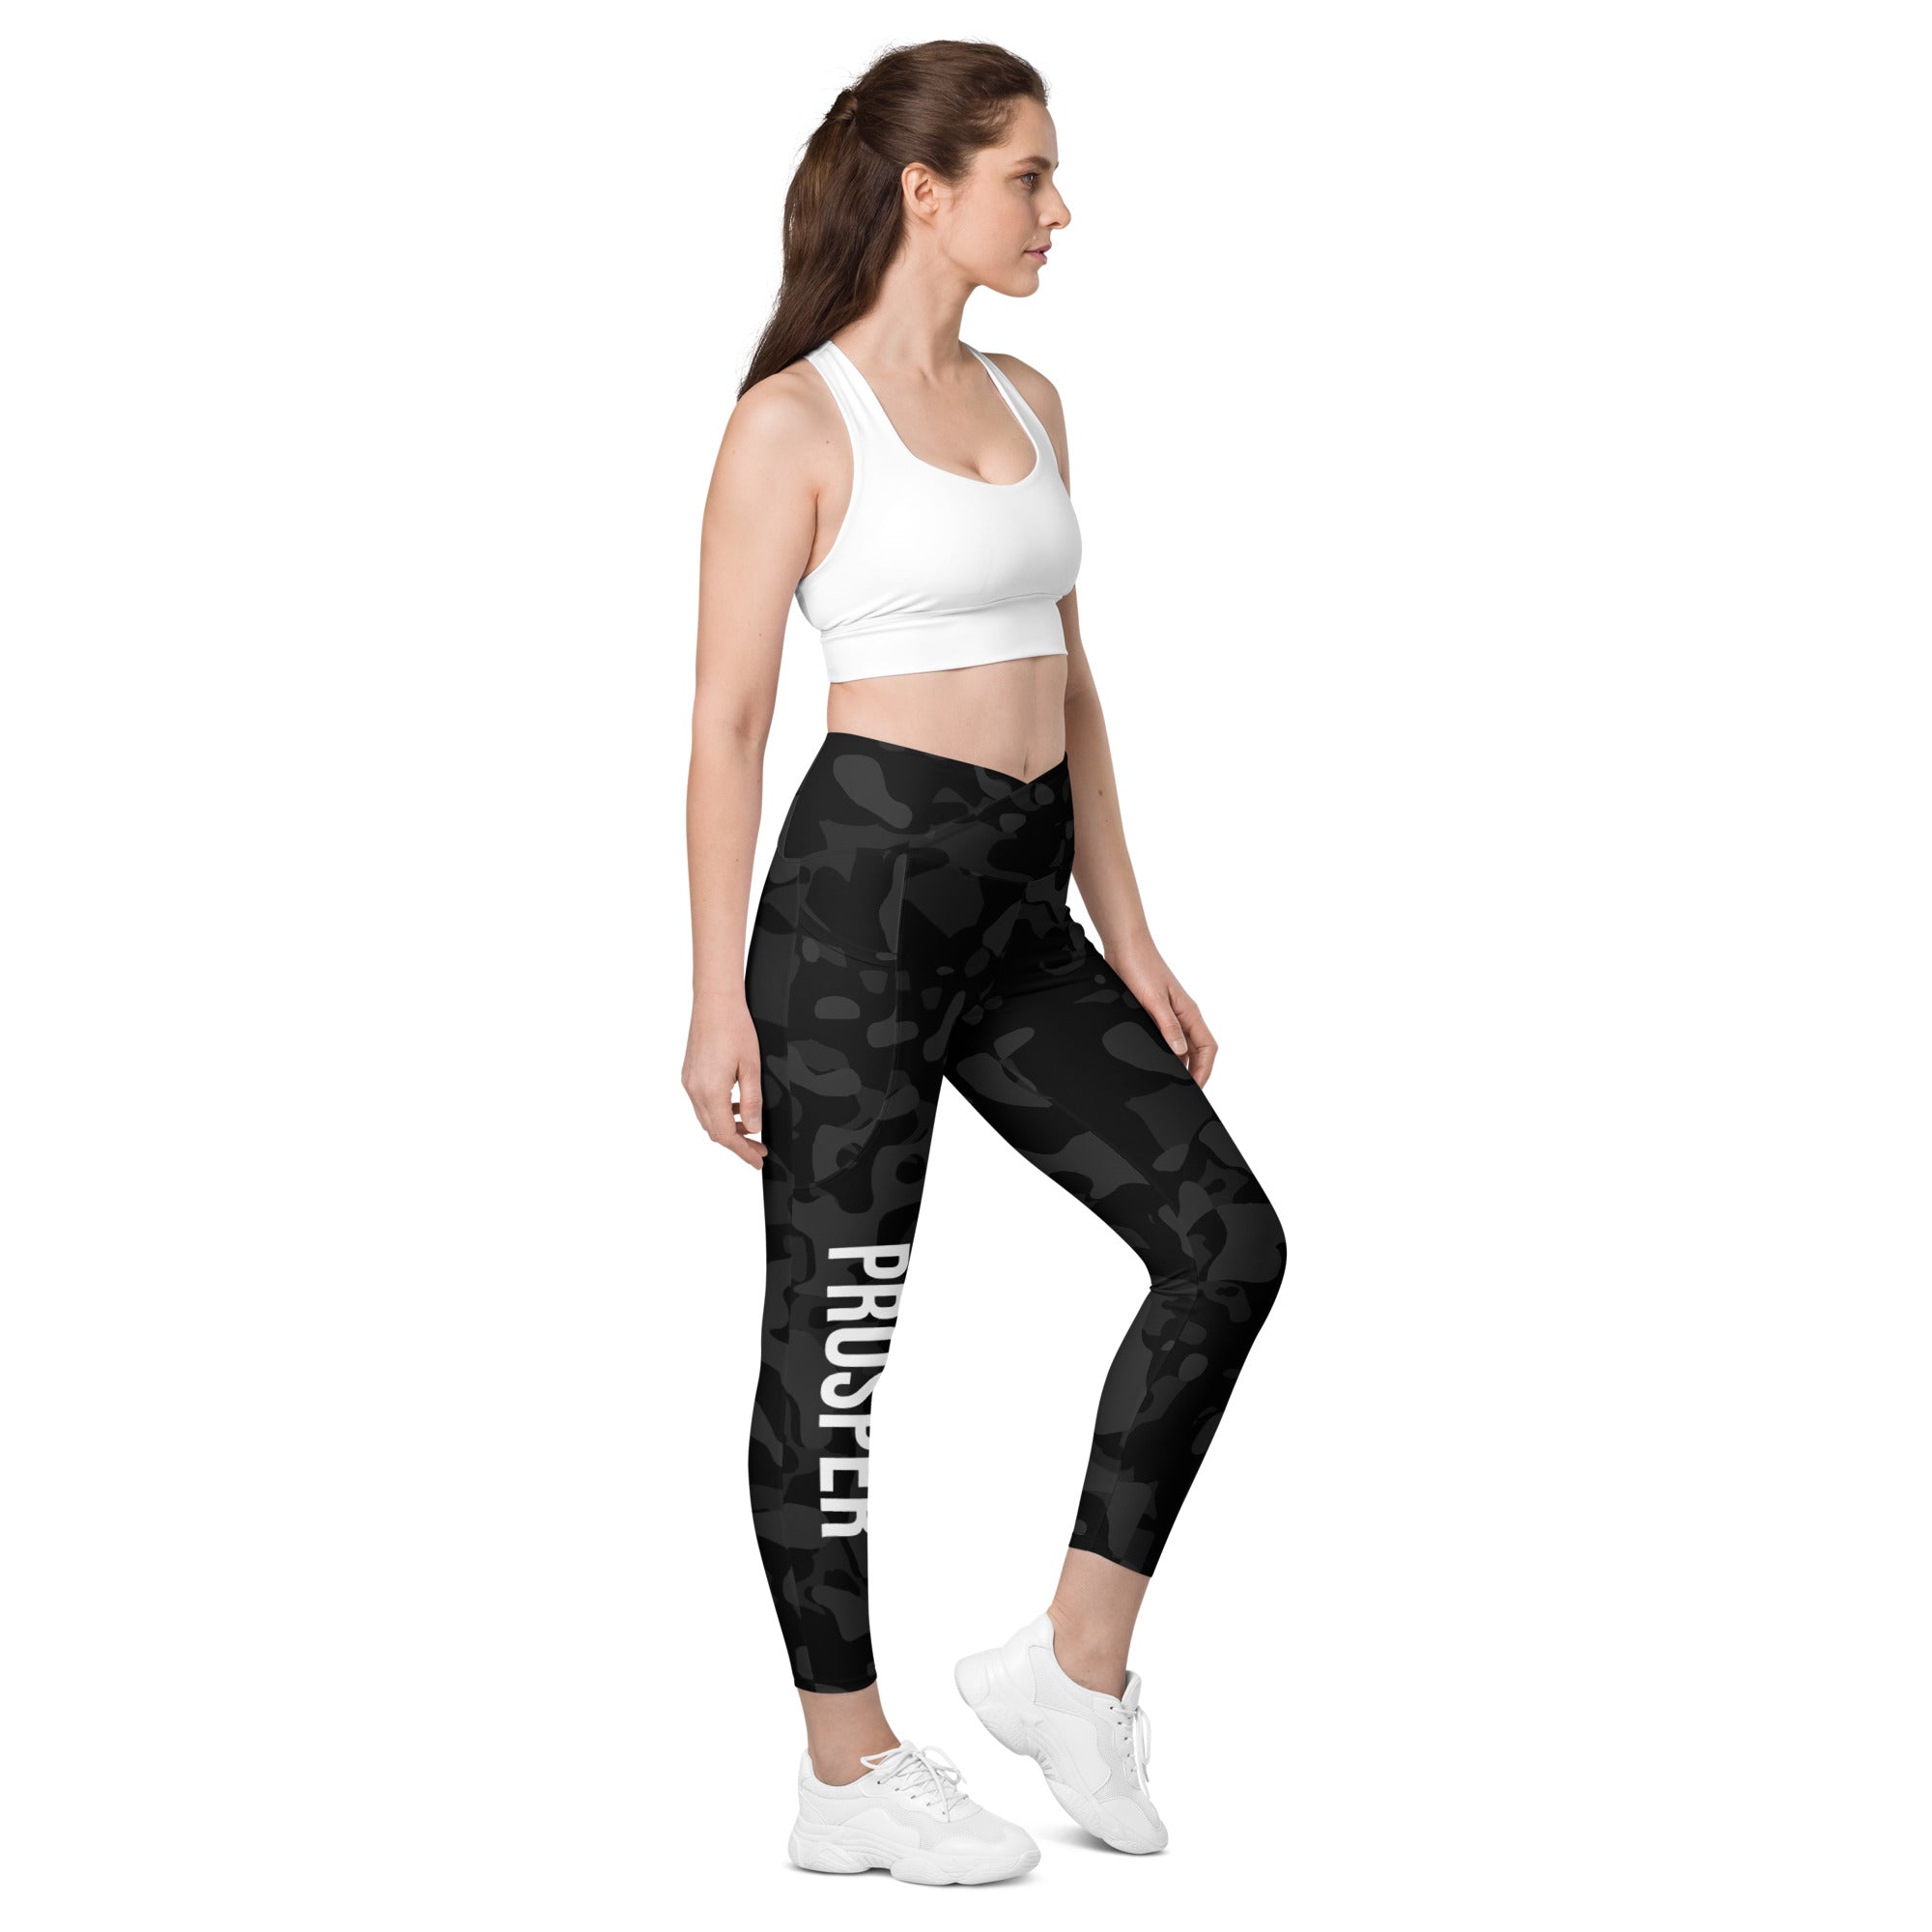 all-over-print-crossover-leggings-with-pockets-white-right-front-63169ed2a3d85.jpg